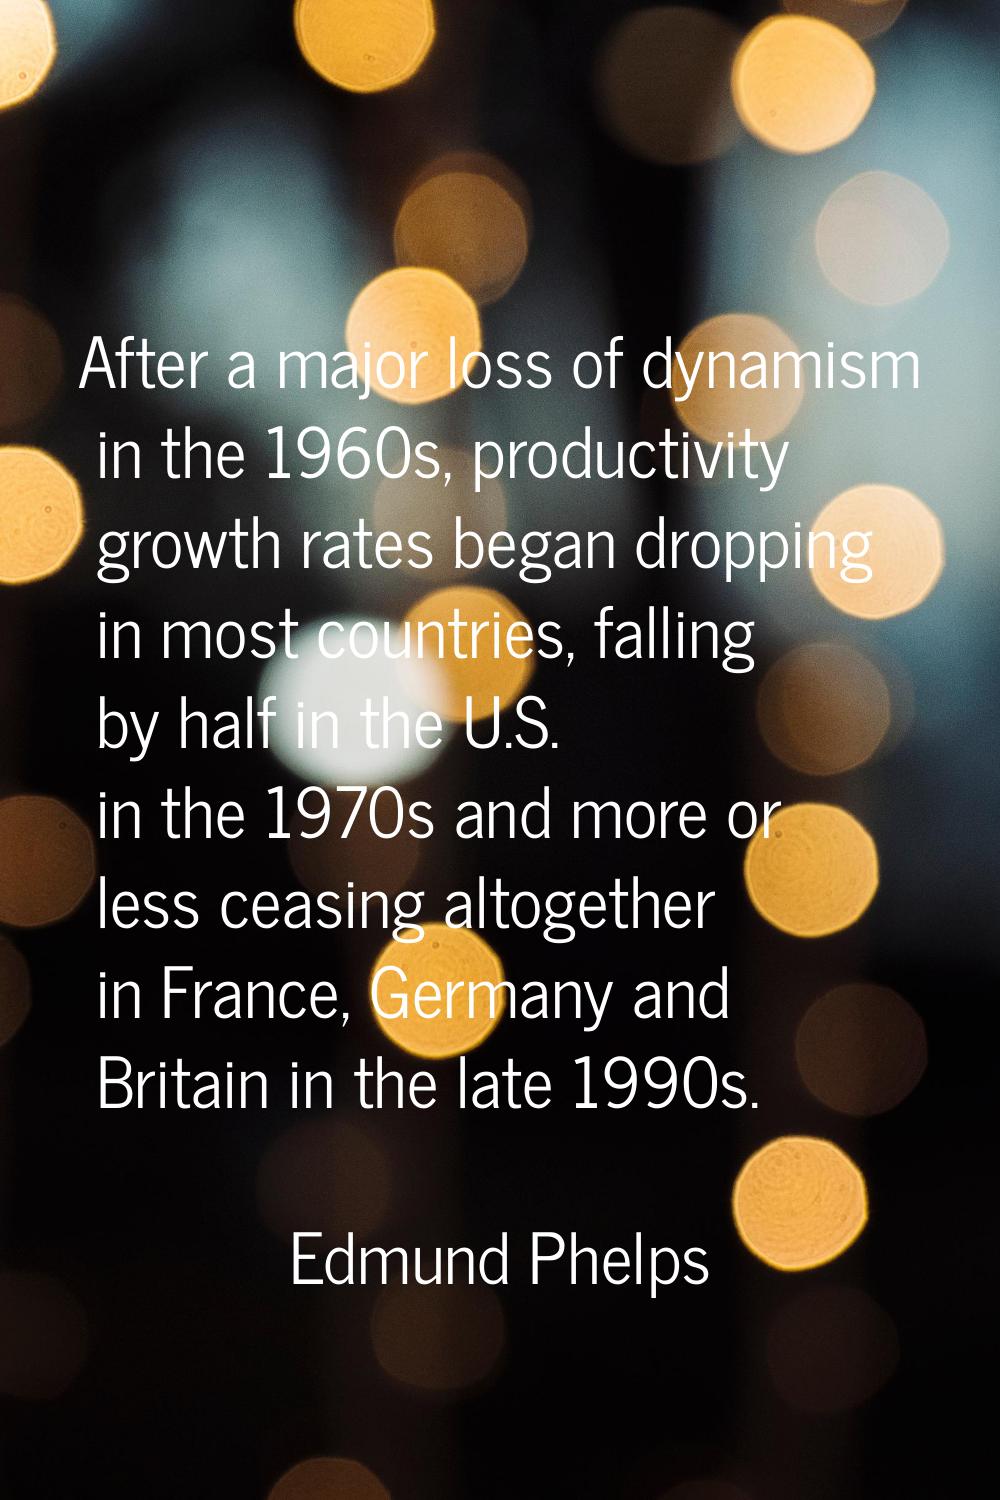 After a major loss of dynamism in the 1960s, productivity growth rates began dropping in most count